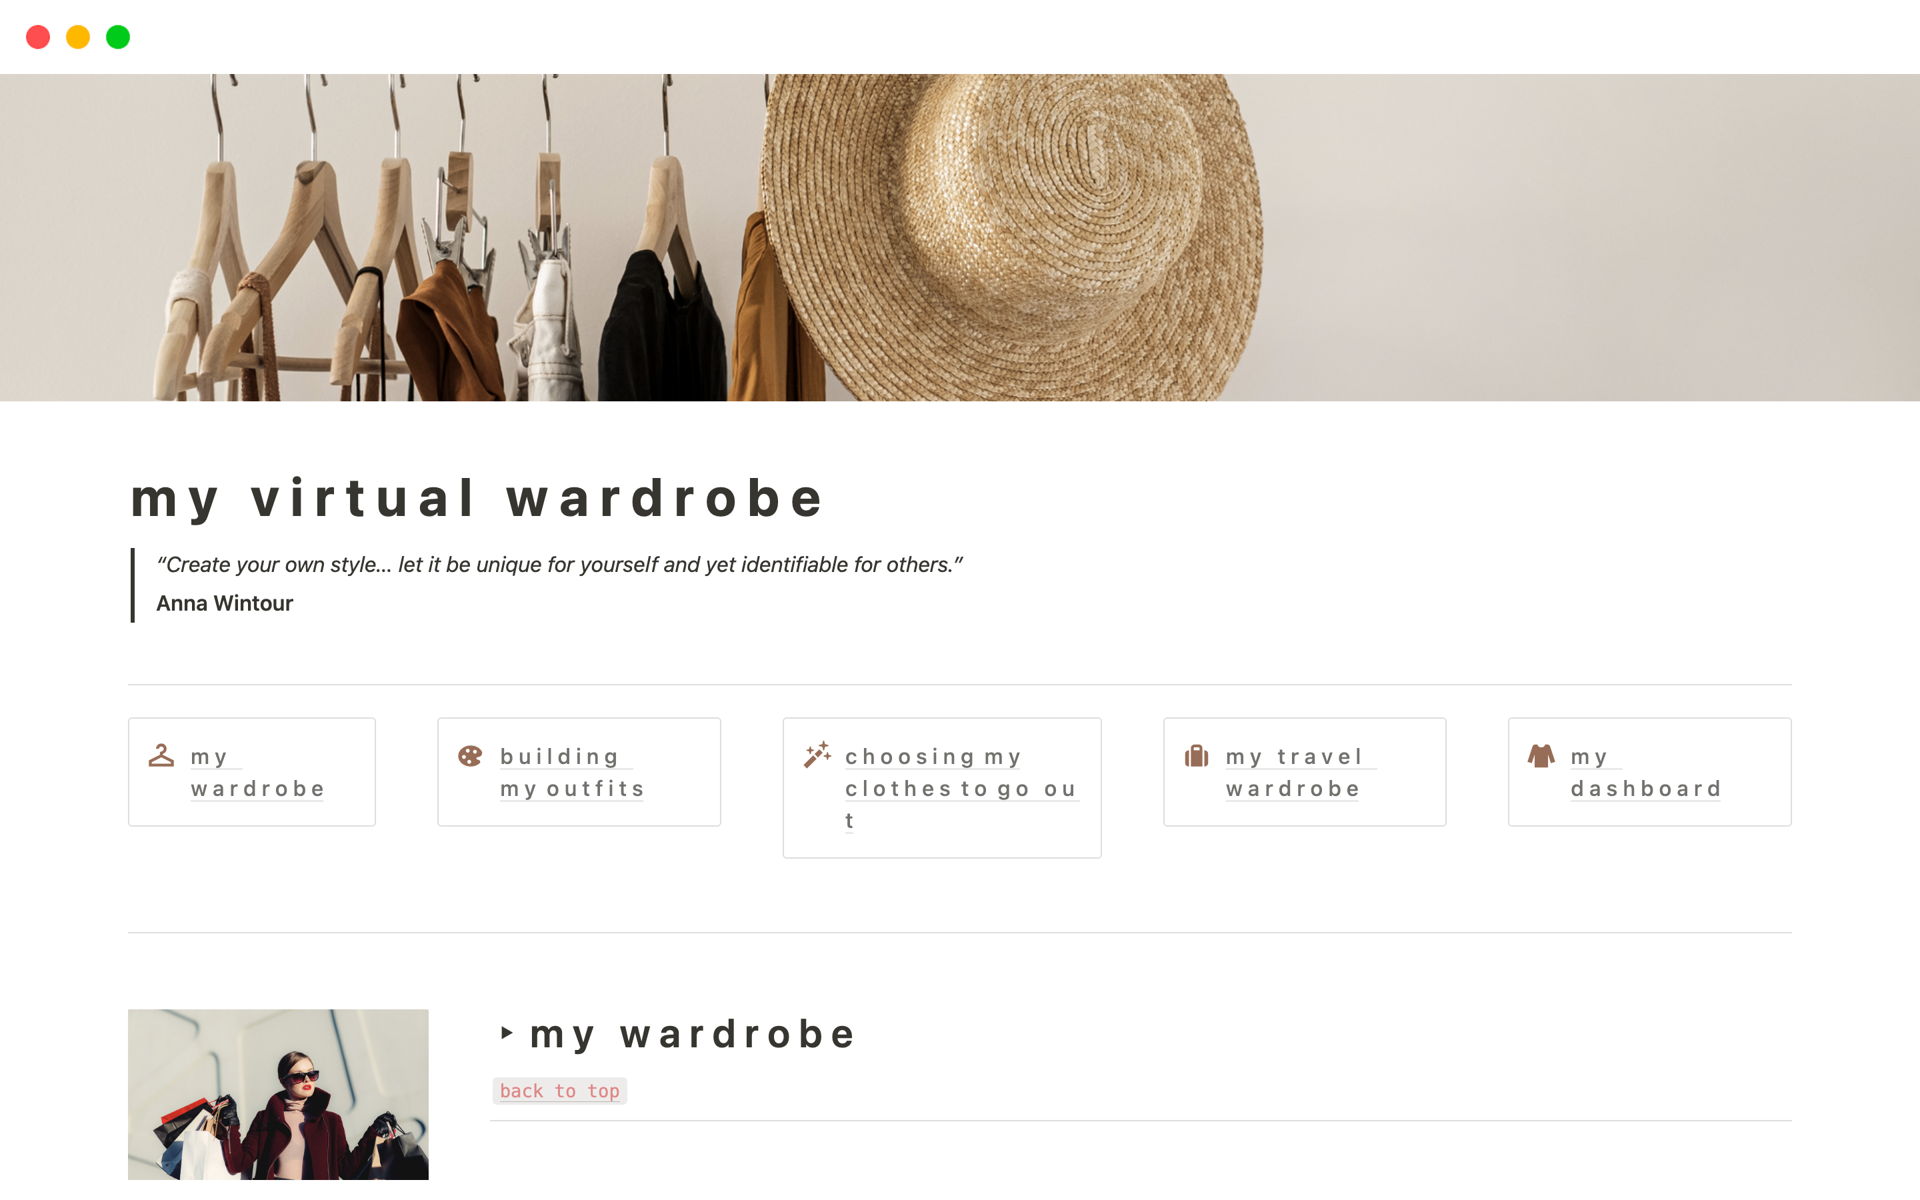 My Virtual Wardrobe helps individuals catalog clothes, create outfits, pick out clothes to go out, track travel packing, create and keep a wishlist, and get wearing suggestions based on estimate vs. actual cost-per-wear comparisons displayed on a self-explained dashboard.